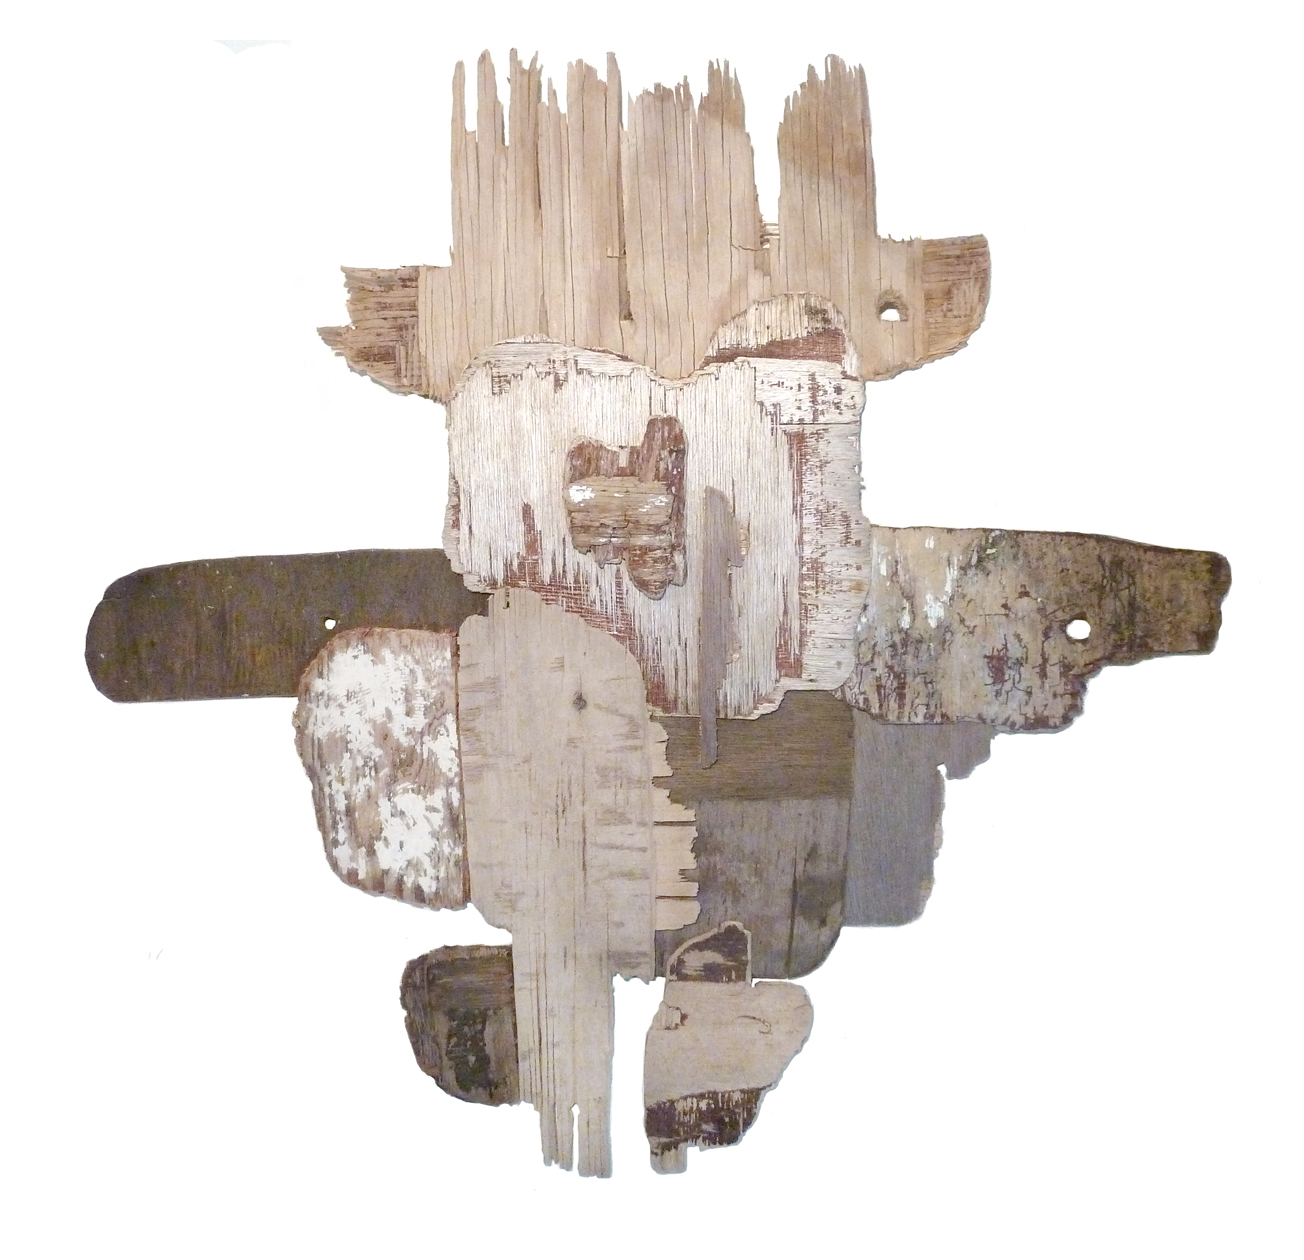    Conundra    found wood assemblage  31" x 27"  2012  (Available)    